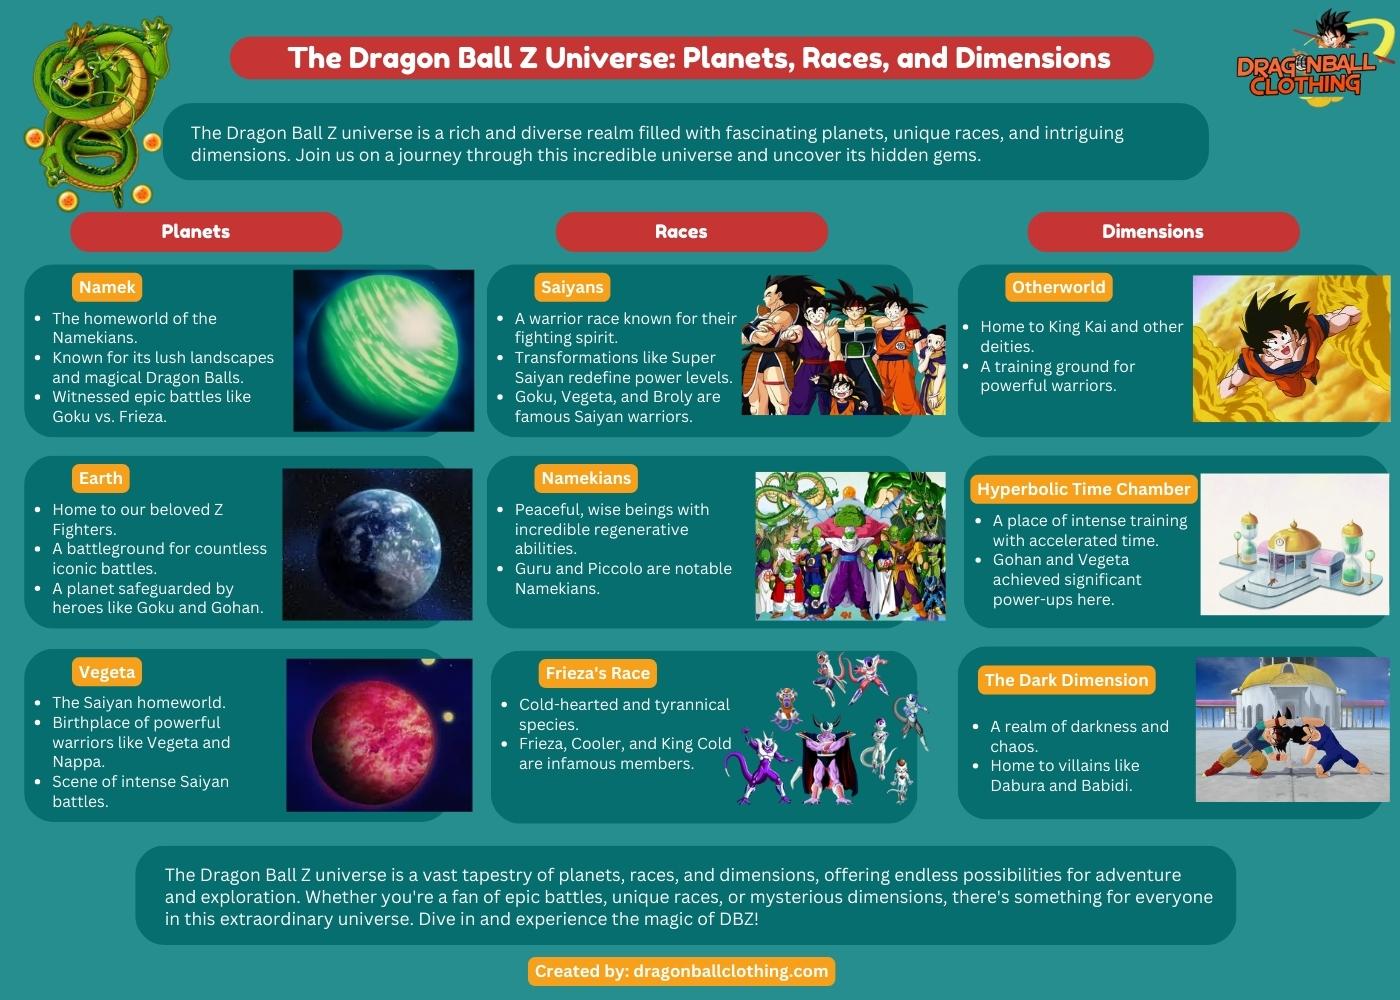 dragon ball z planets, races and dimensions infographic